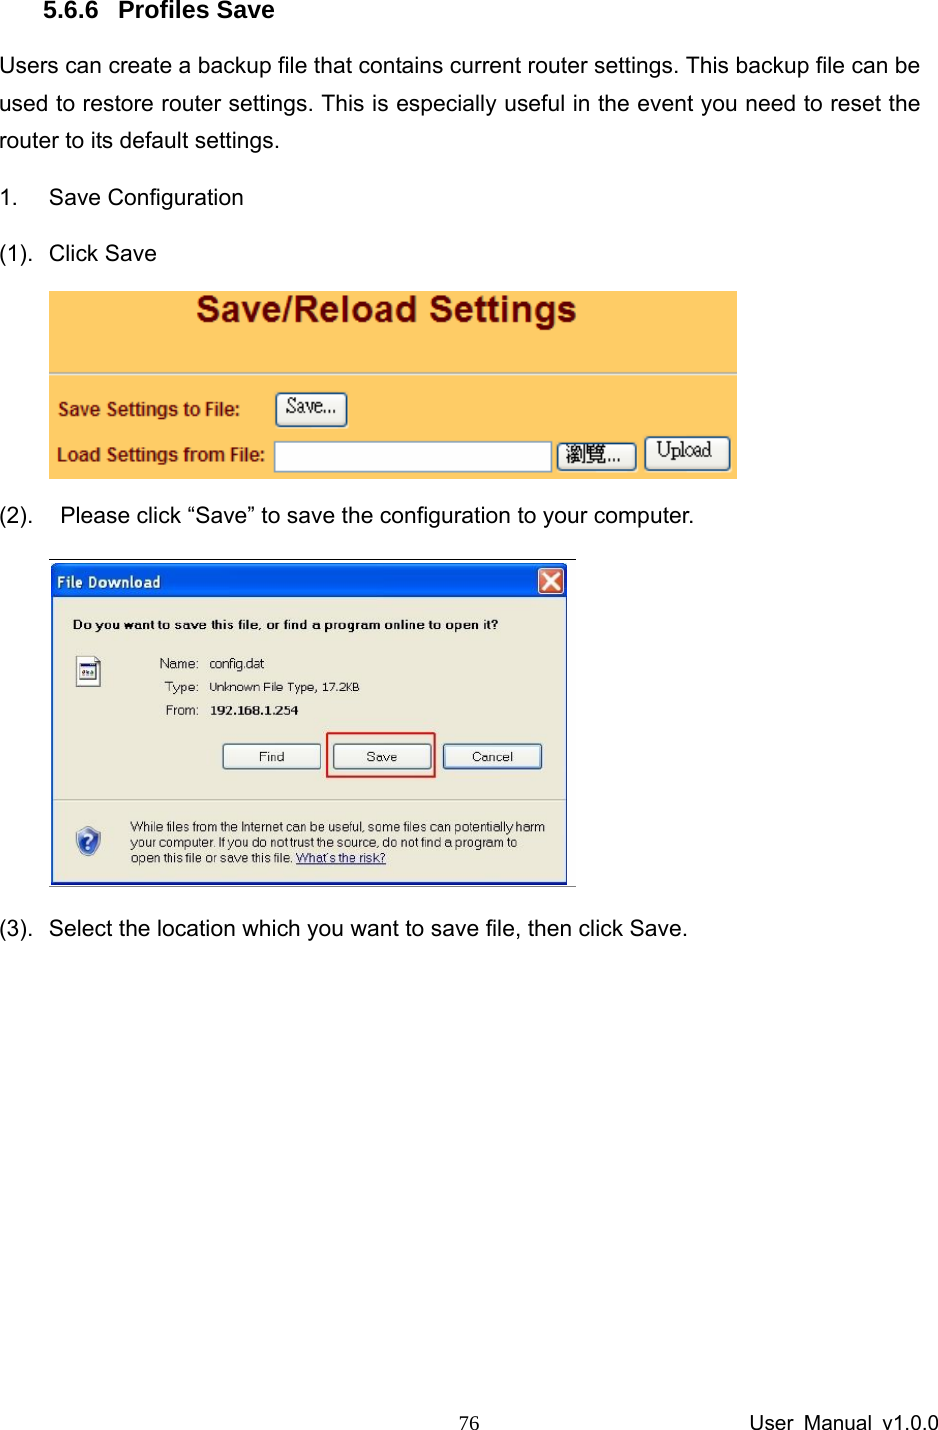                 User Manual v1.0.0 76 5.6.6 Profiles Save Users can create a backup file that contains current router settings. This backup file can be used to restore router settings. This is especially useful in the event you need to reset the router to its default settings. 1. Save Configuration  (1). Click Save  (2).    Please click “Save” to save the configuration to your computer.     (3).  Select the location which you want to save file, then click Save.       